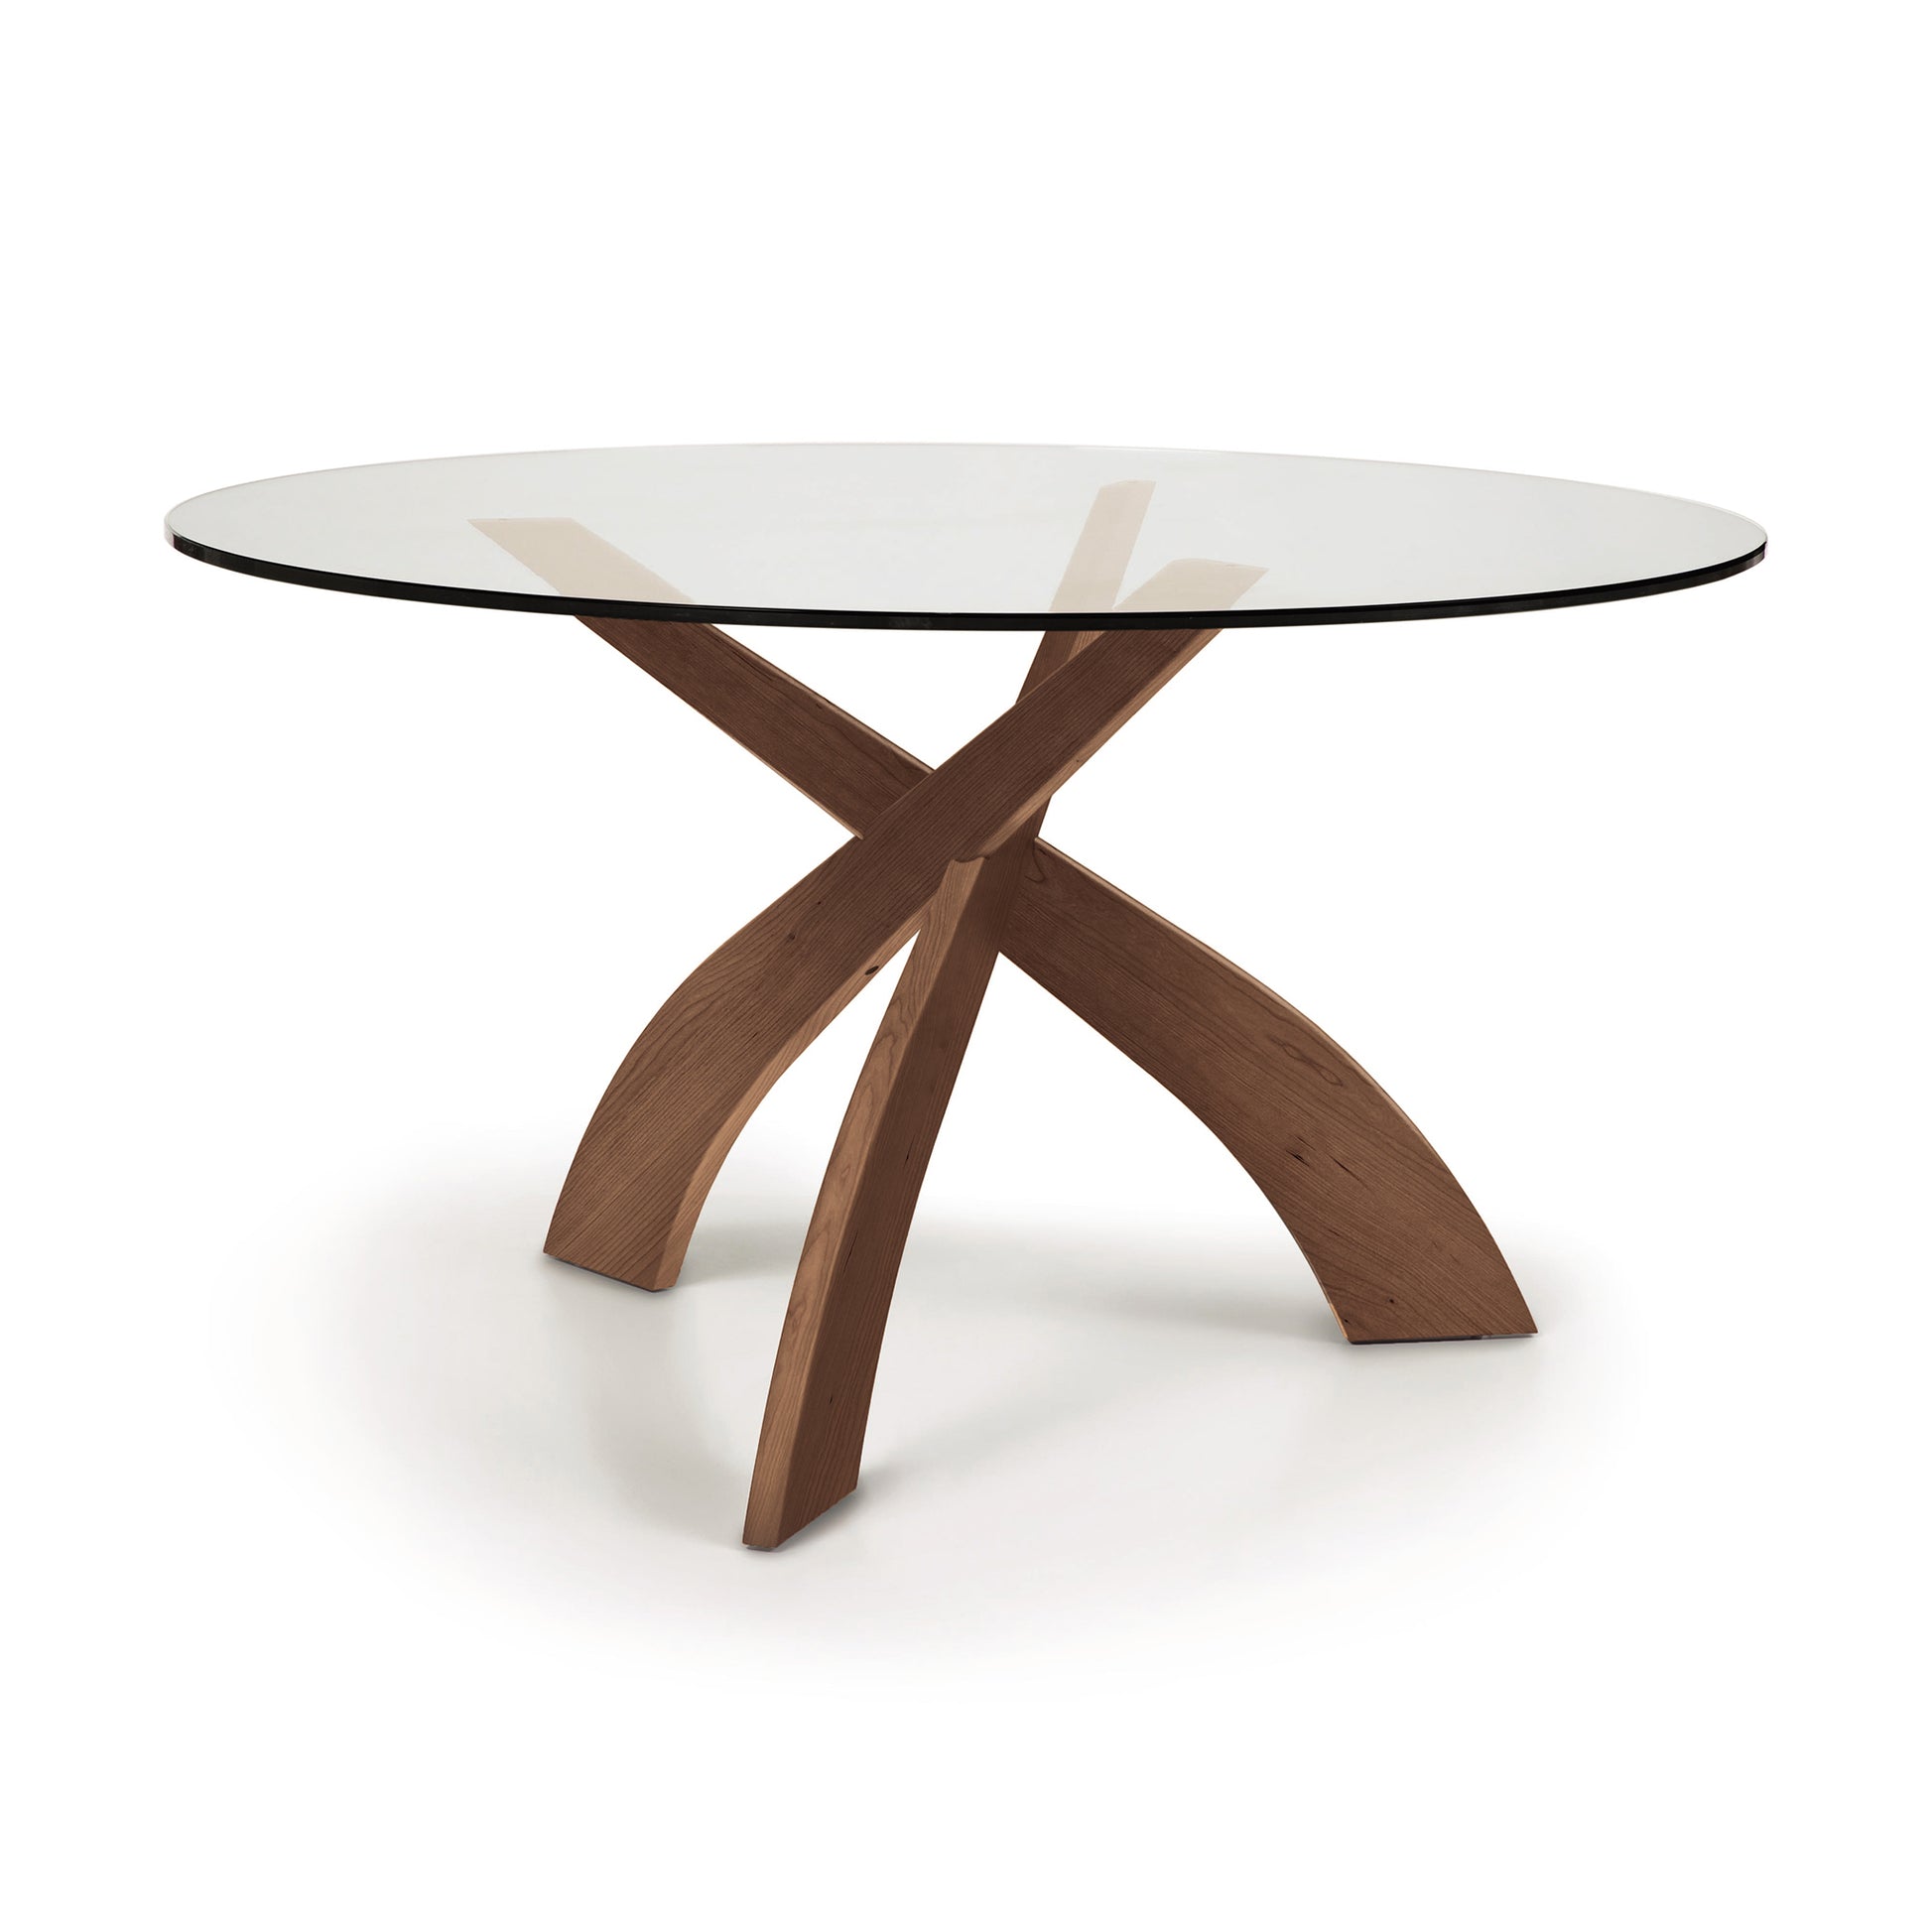 A modern Entwine Round Glass Top Dining Table by Copeland Furniture with a sustainably sourced cherry wood cross-type base on a white background.